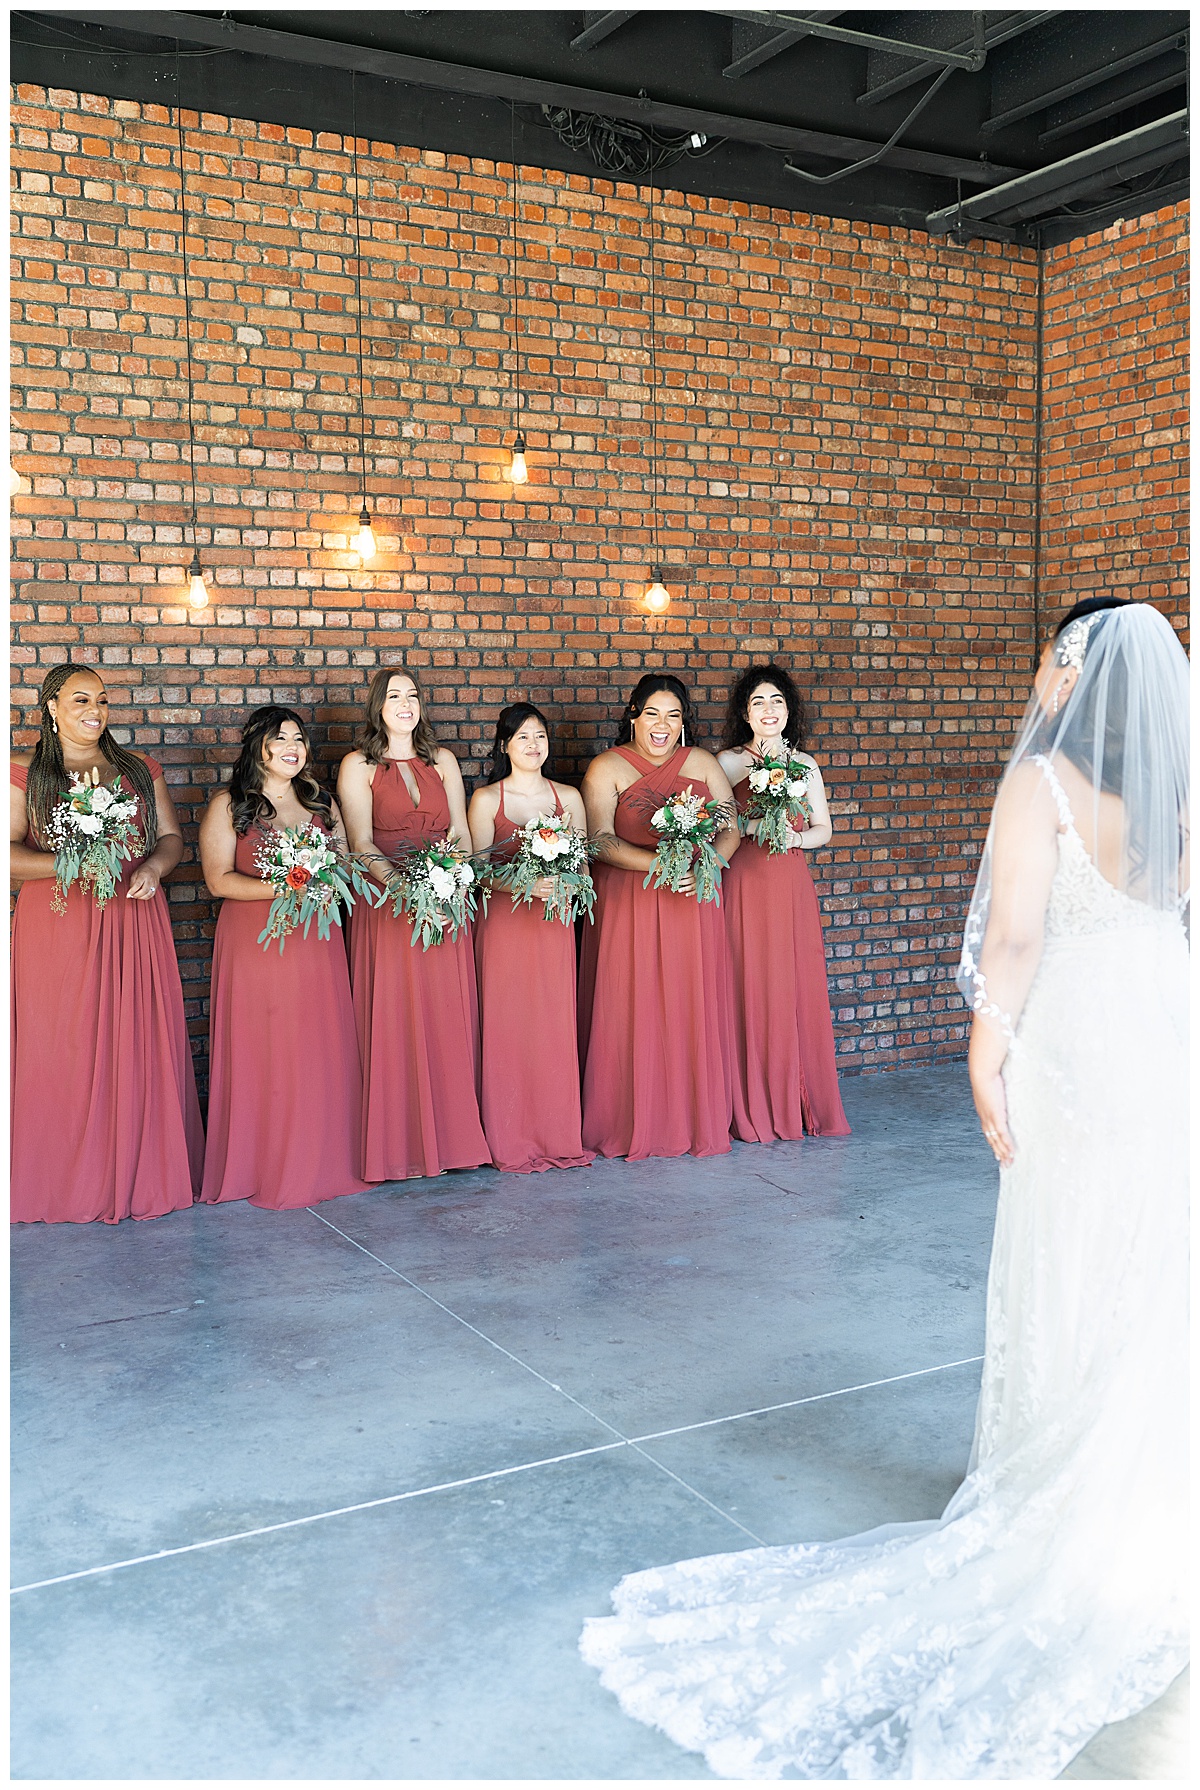 Bridal party see bride for the first time for Houston’s Best Wedding Photographers